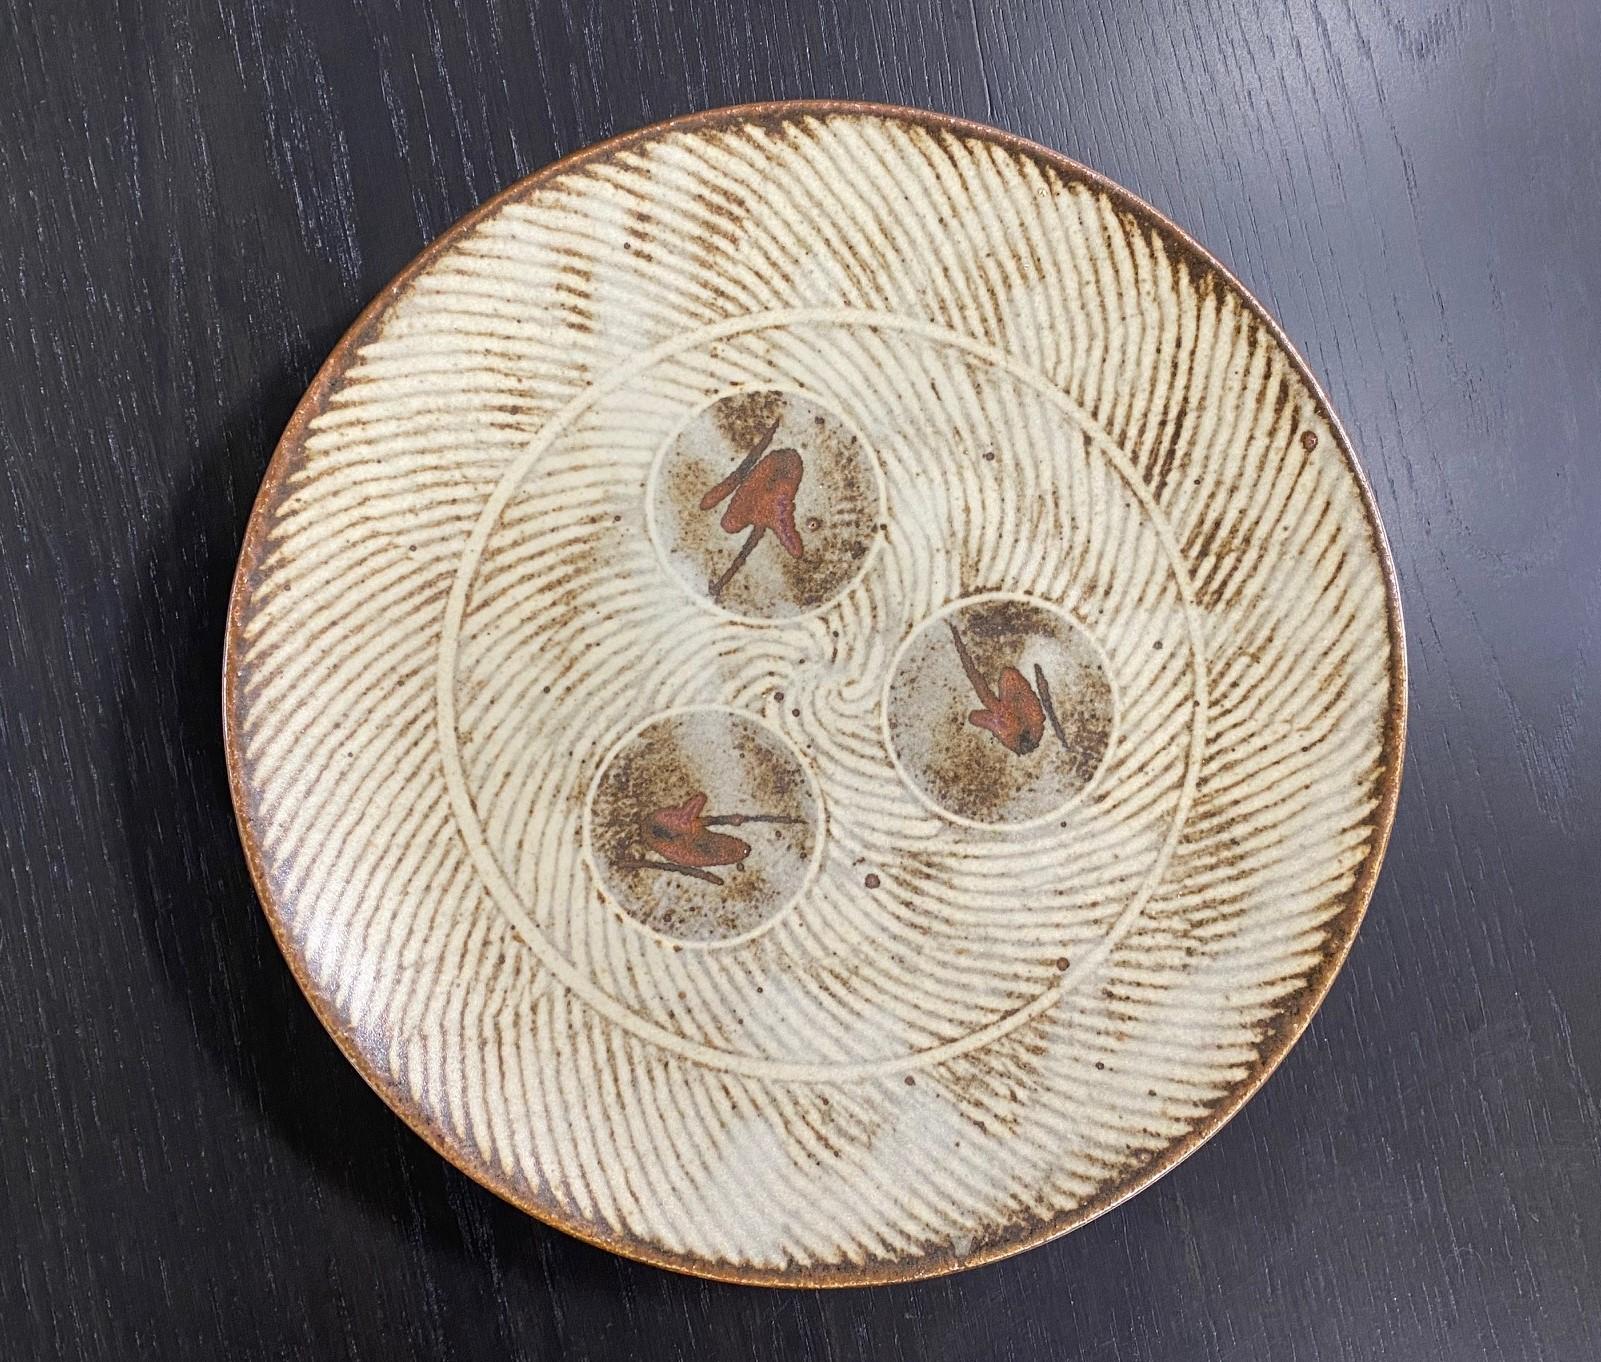 Tatsuzo Shimaoka Signed Japanese Glazed Rope Inlay Ceramic Pottery Bowl Plate In Good Condition For Sale In Studio City, CA